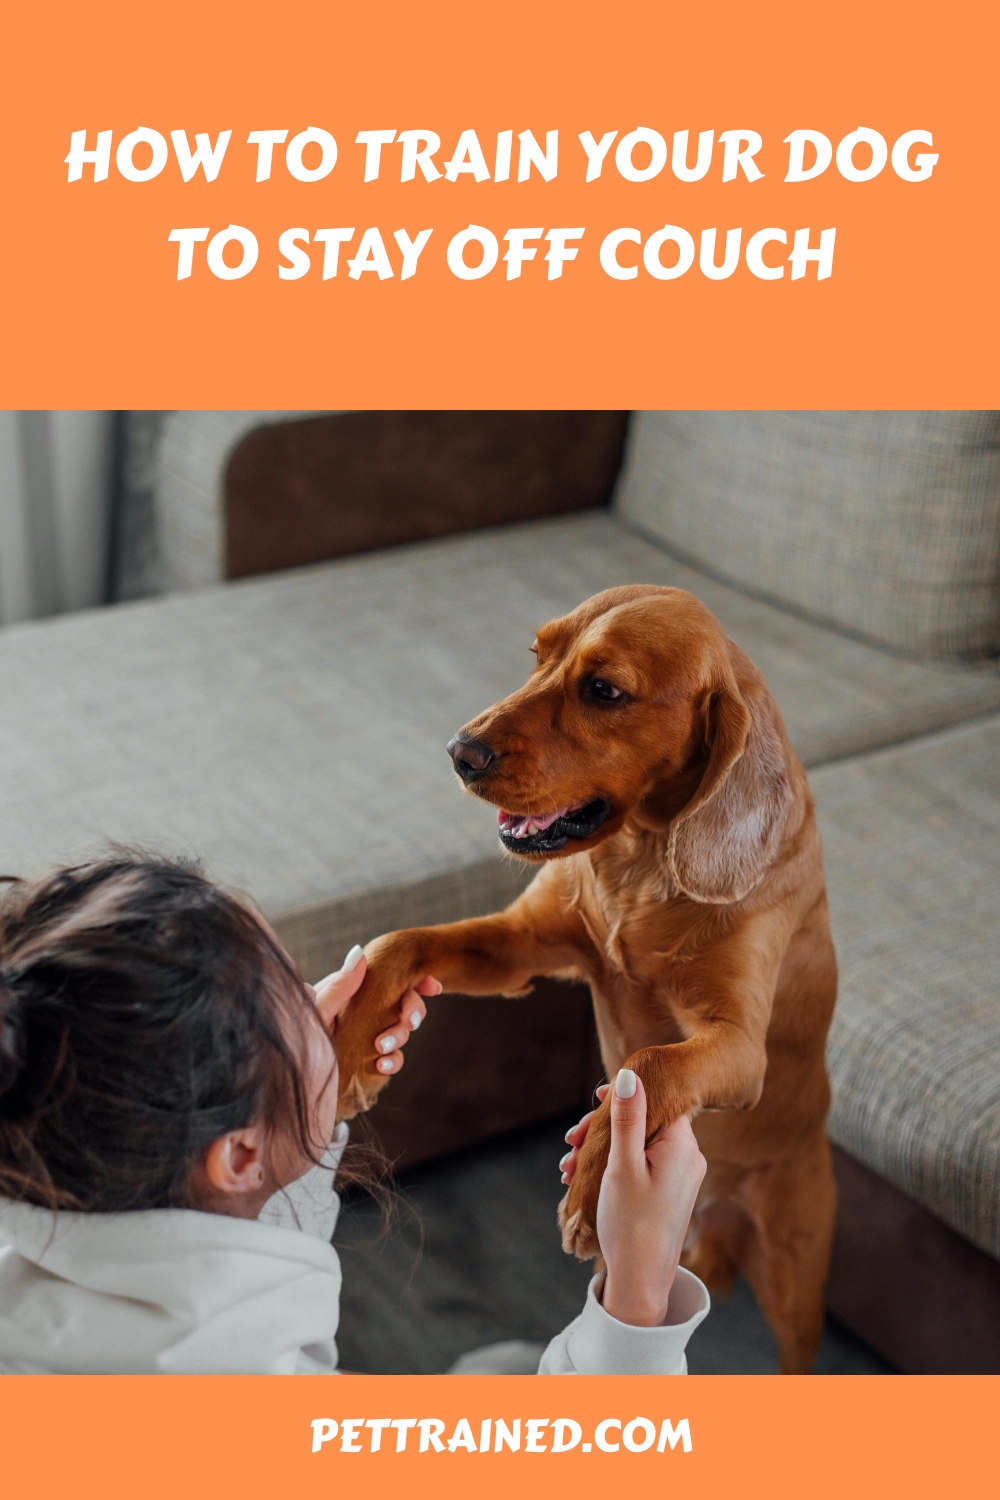 How to Train Your Dog to Stay off Couch